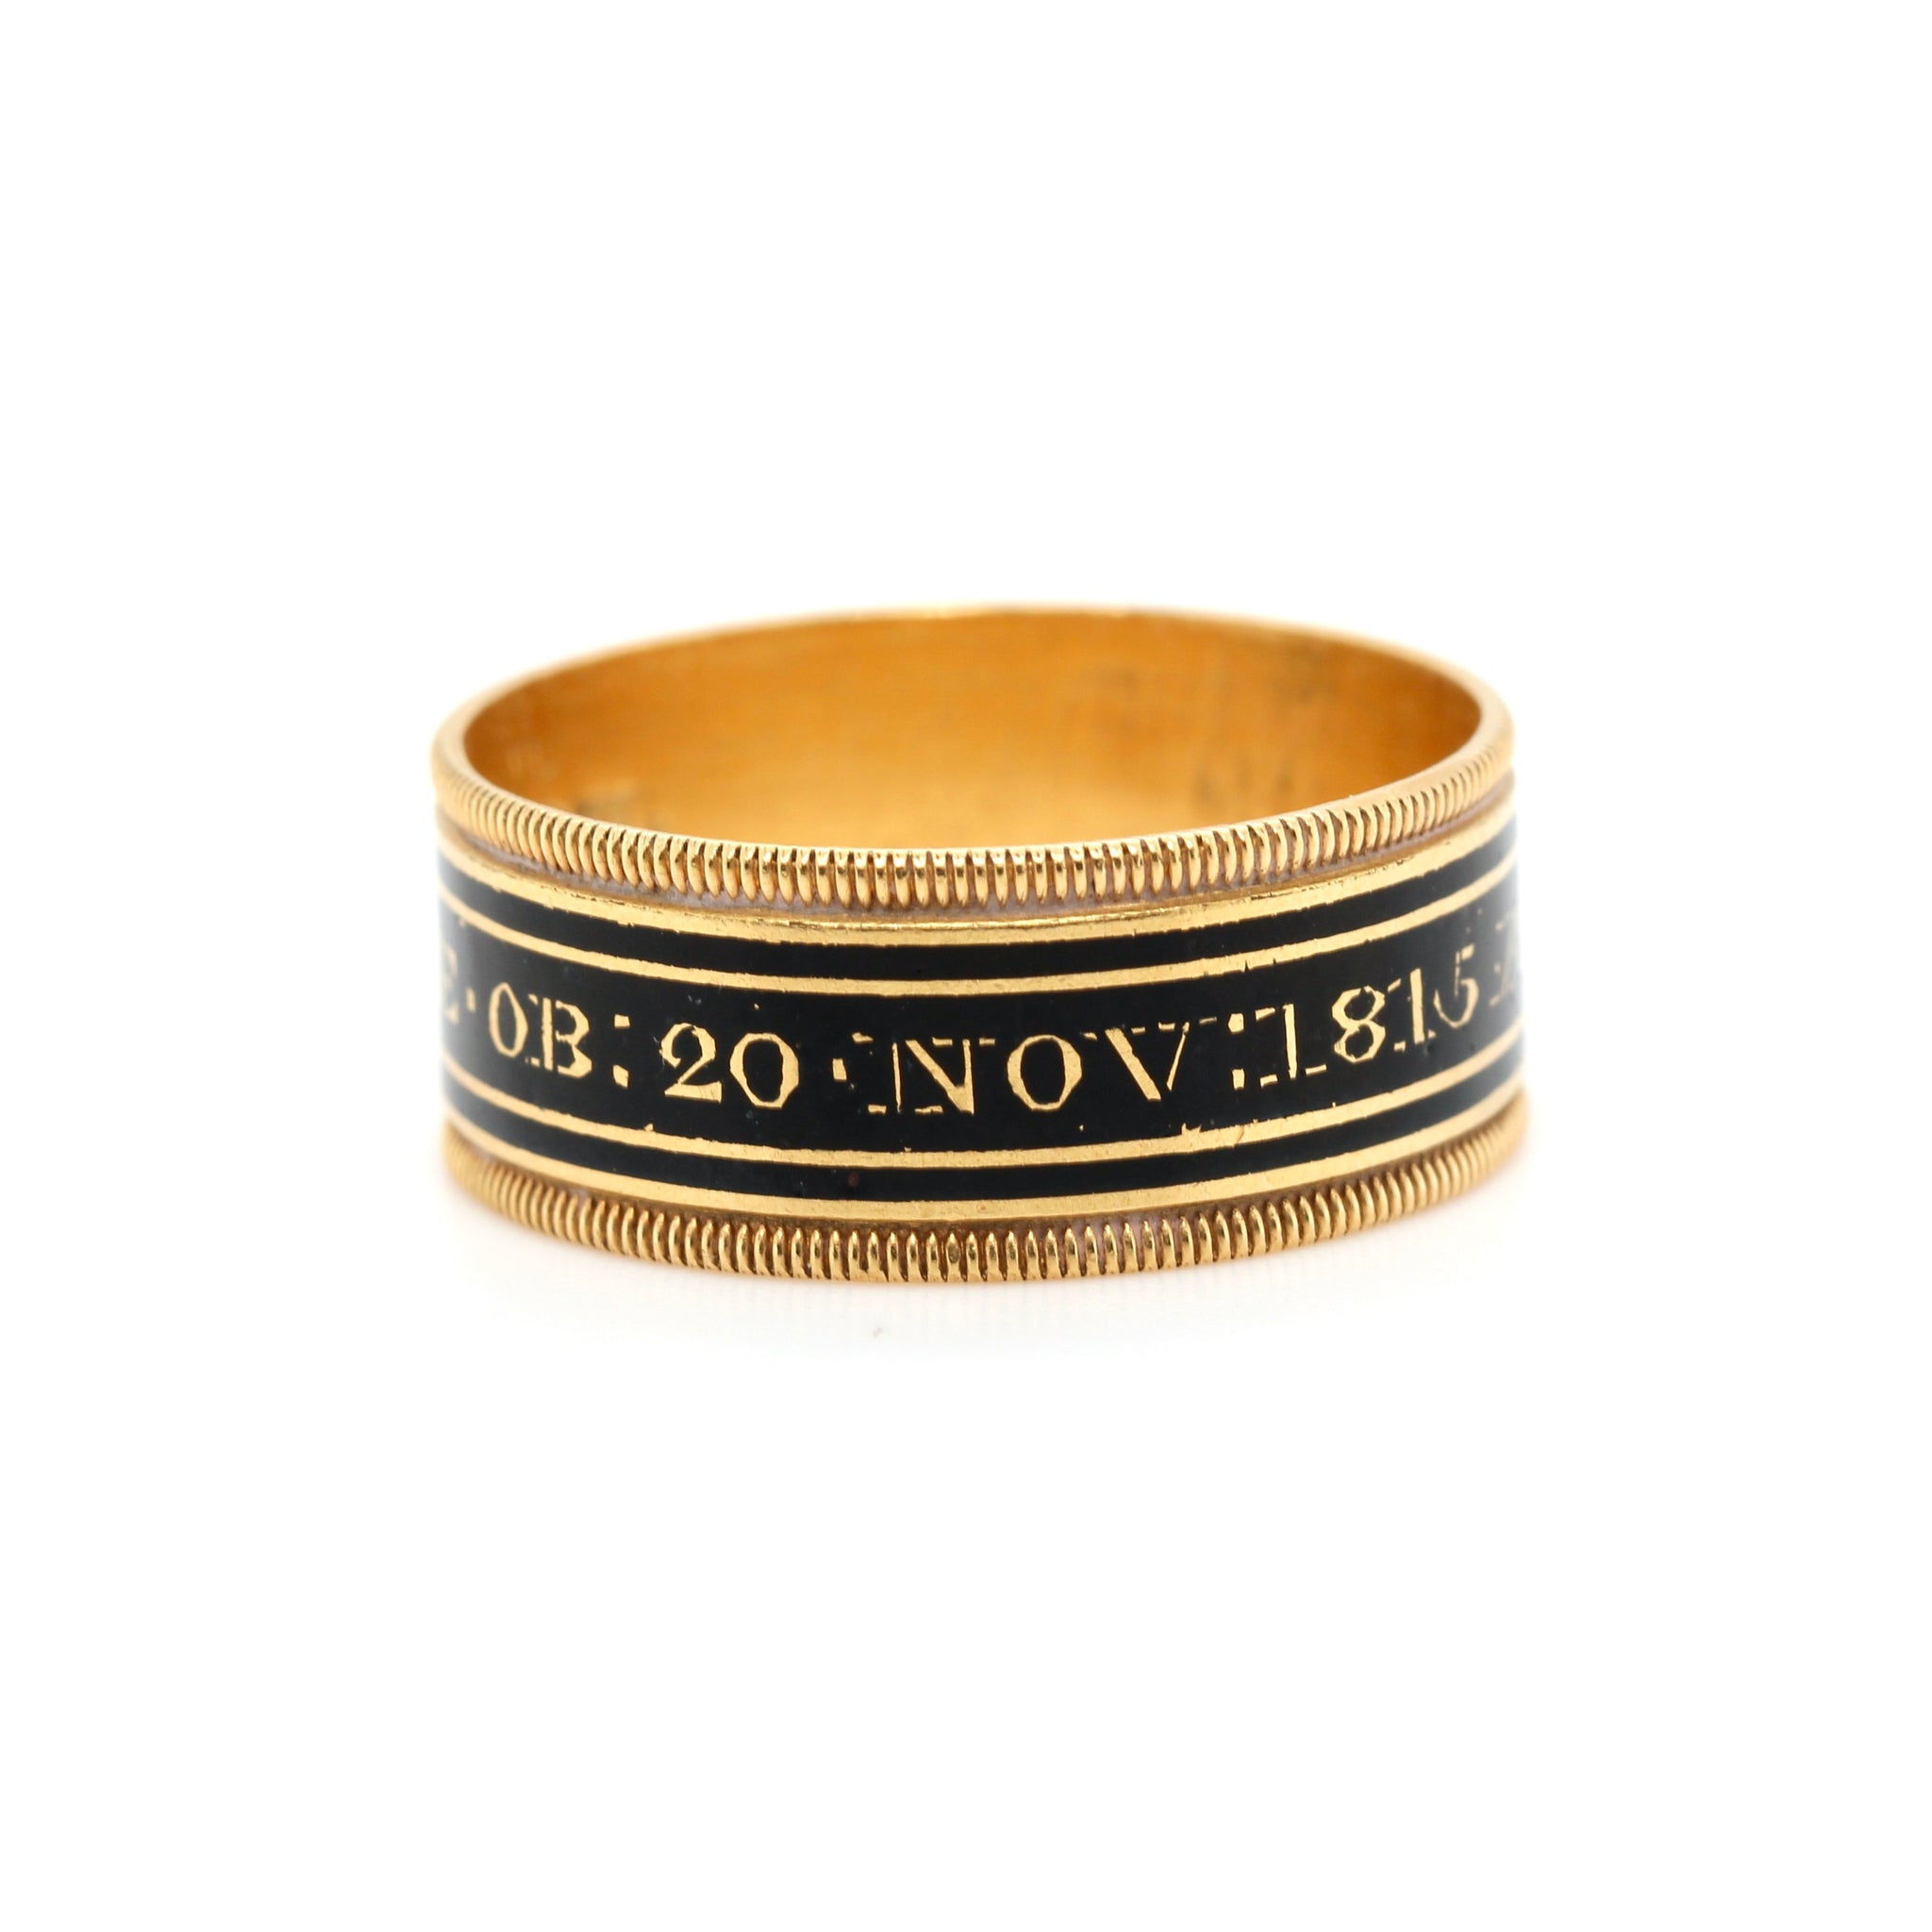 Georgian Mourning Band Ring "Mary Grier"